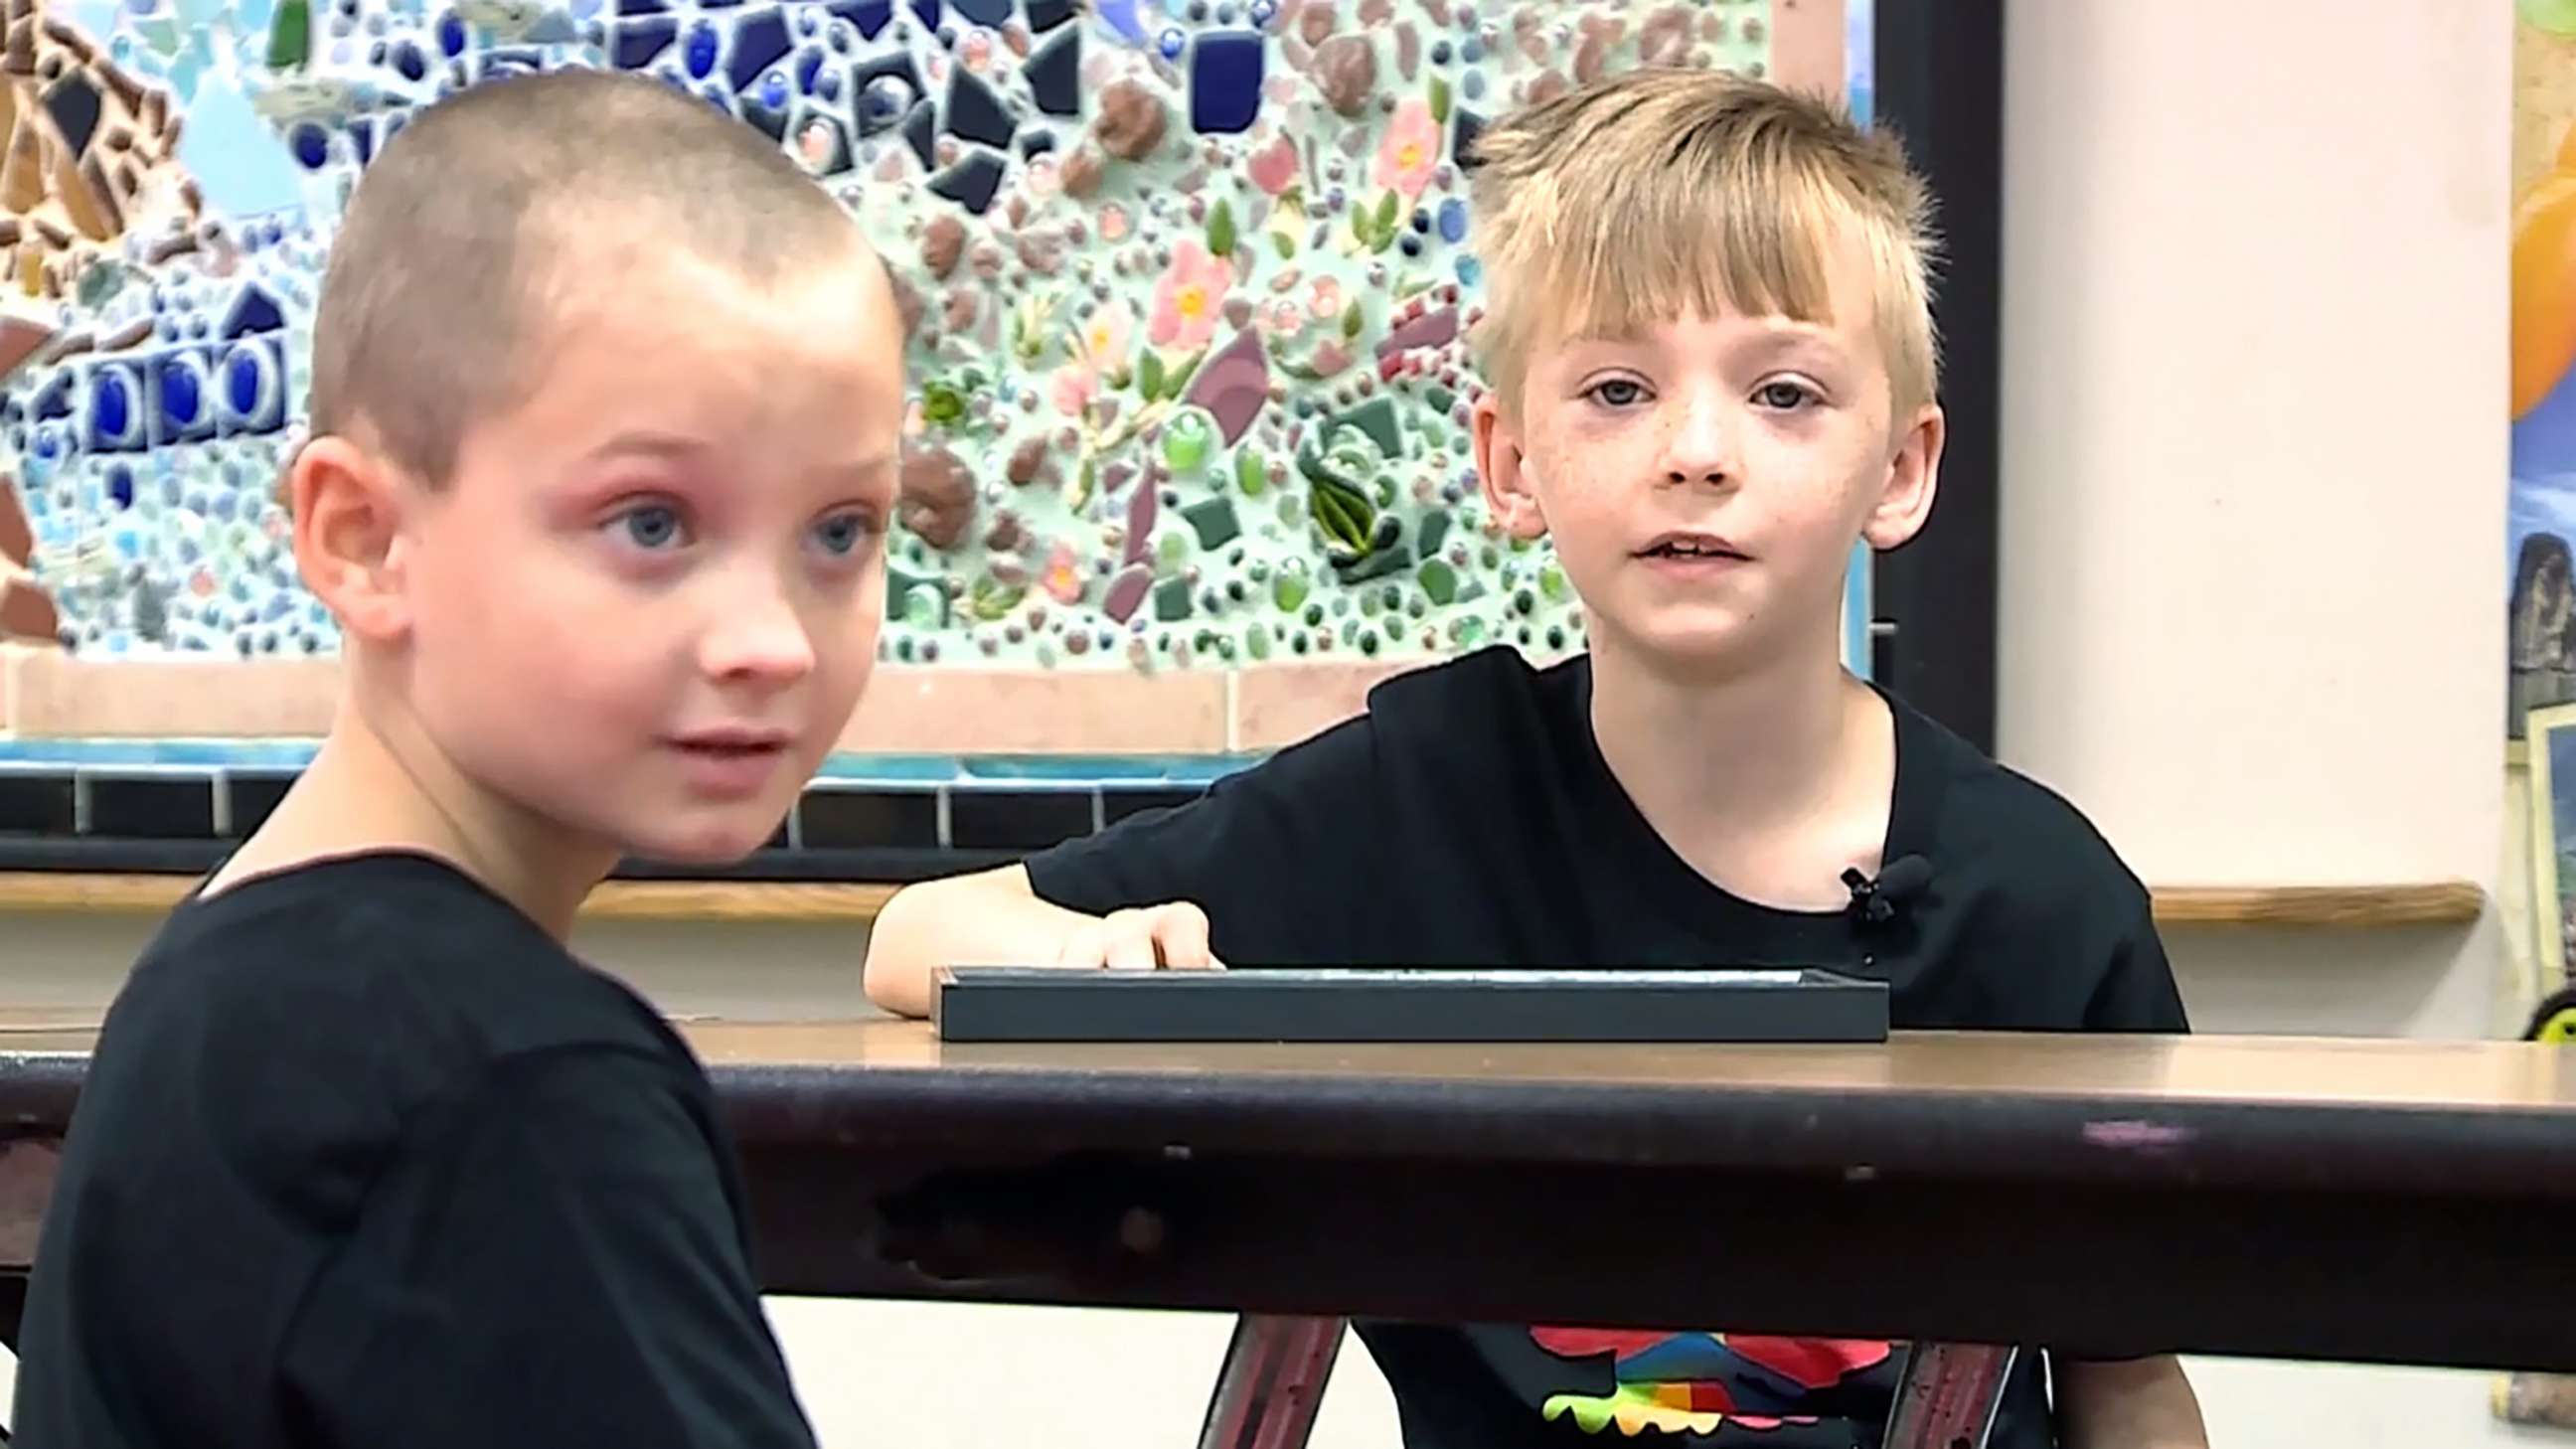 PHOTO: Cashton York and Garrett Brown in the cafeteria at their school in Norman, Okla.